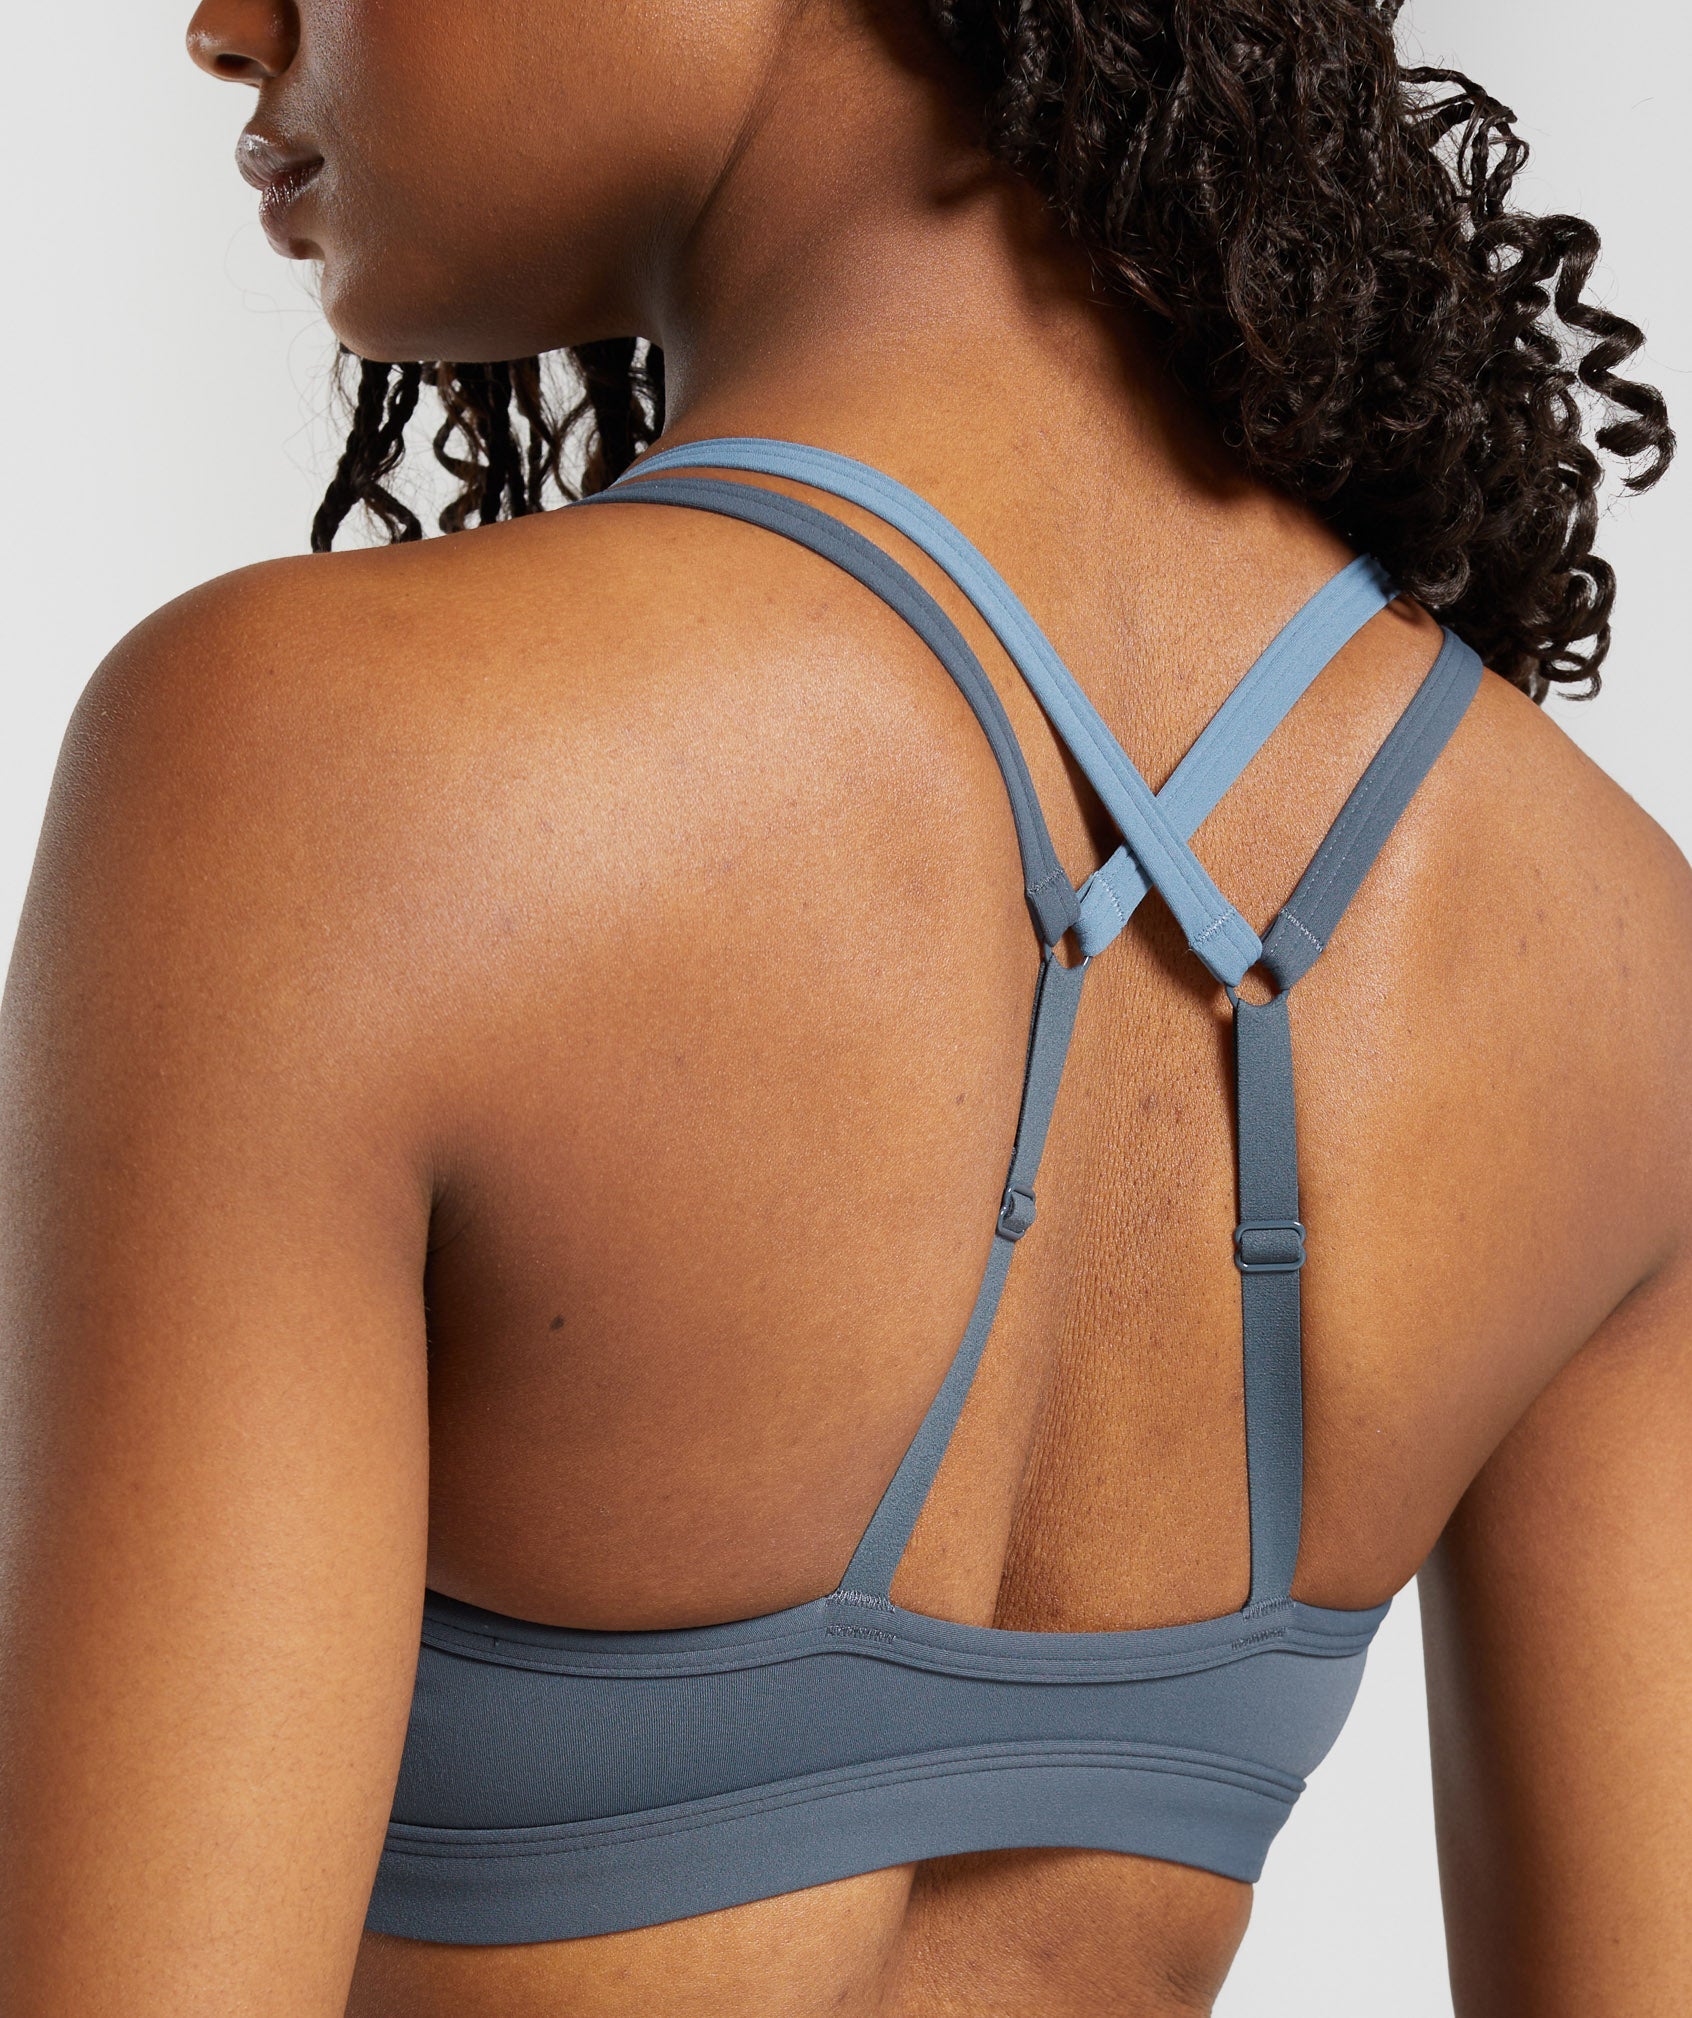 Double Up Sports Bra in Titanium Blue/Faded Blue - view 6